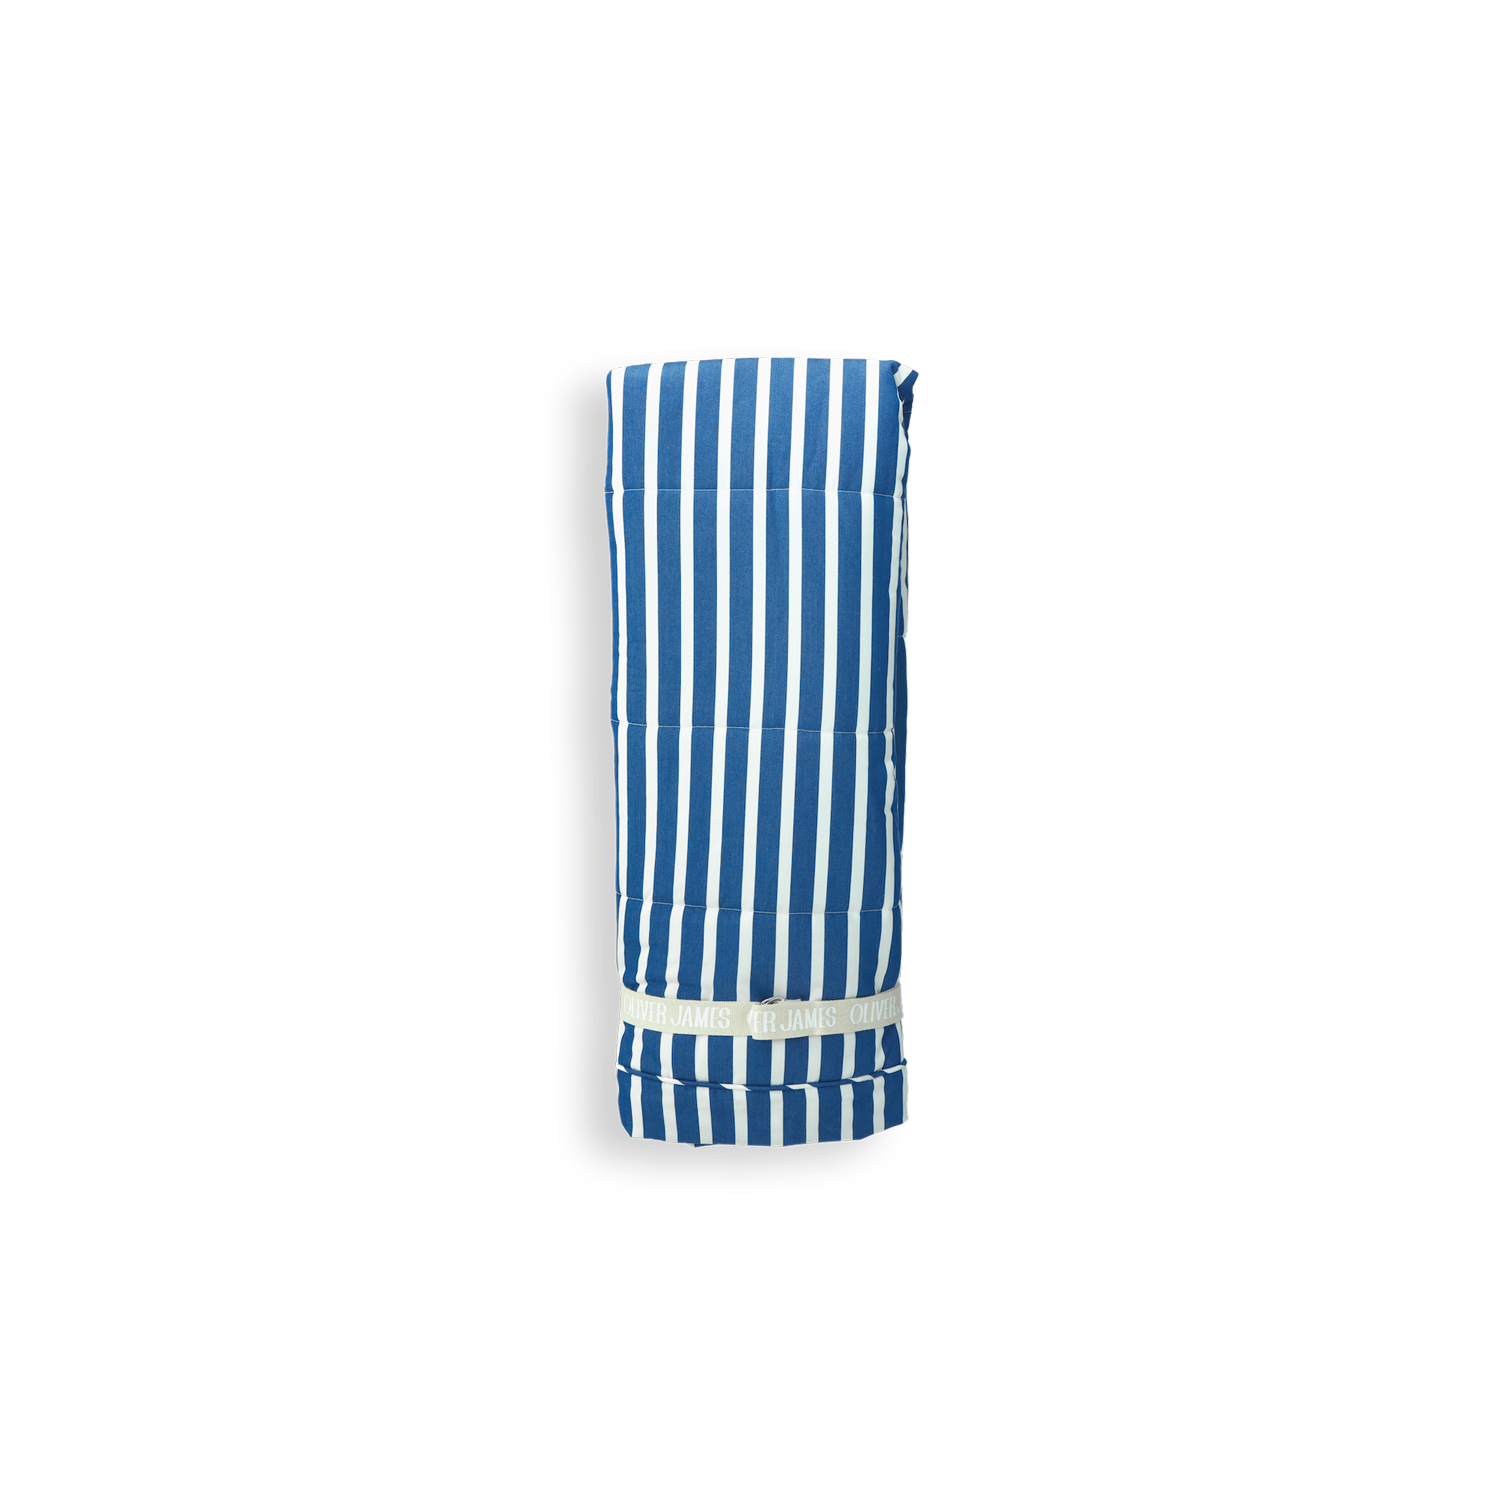 A front view of a luxury pool float hanging in a blue and white stripe colored fabric.